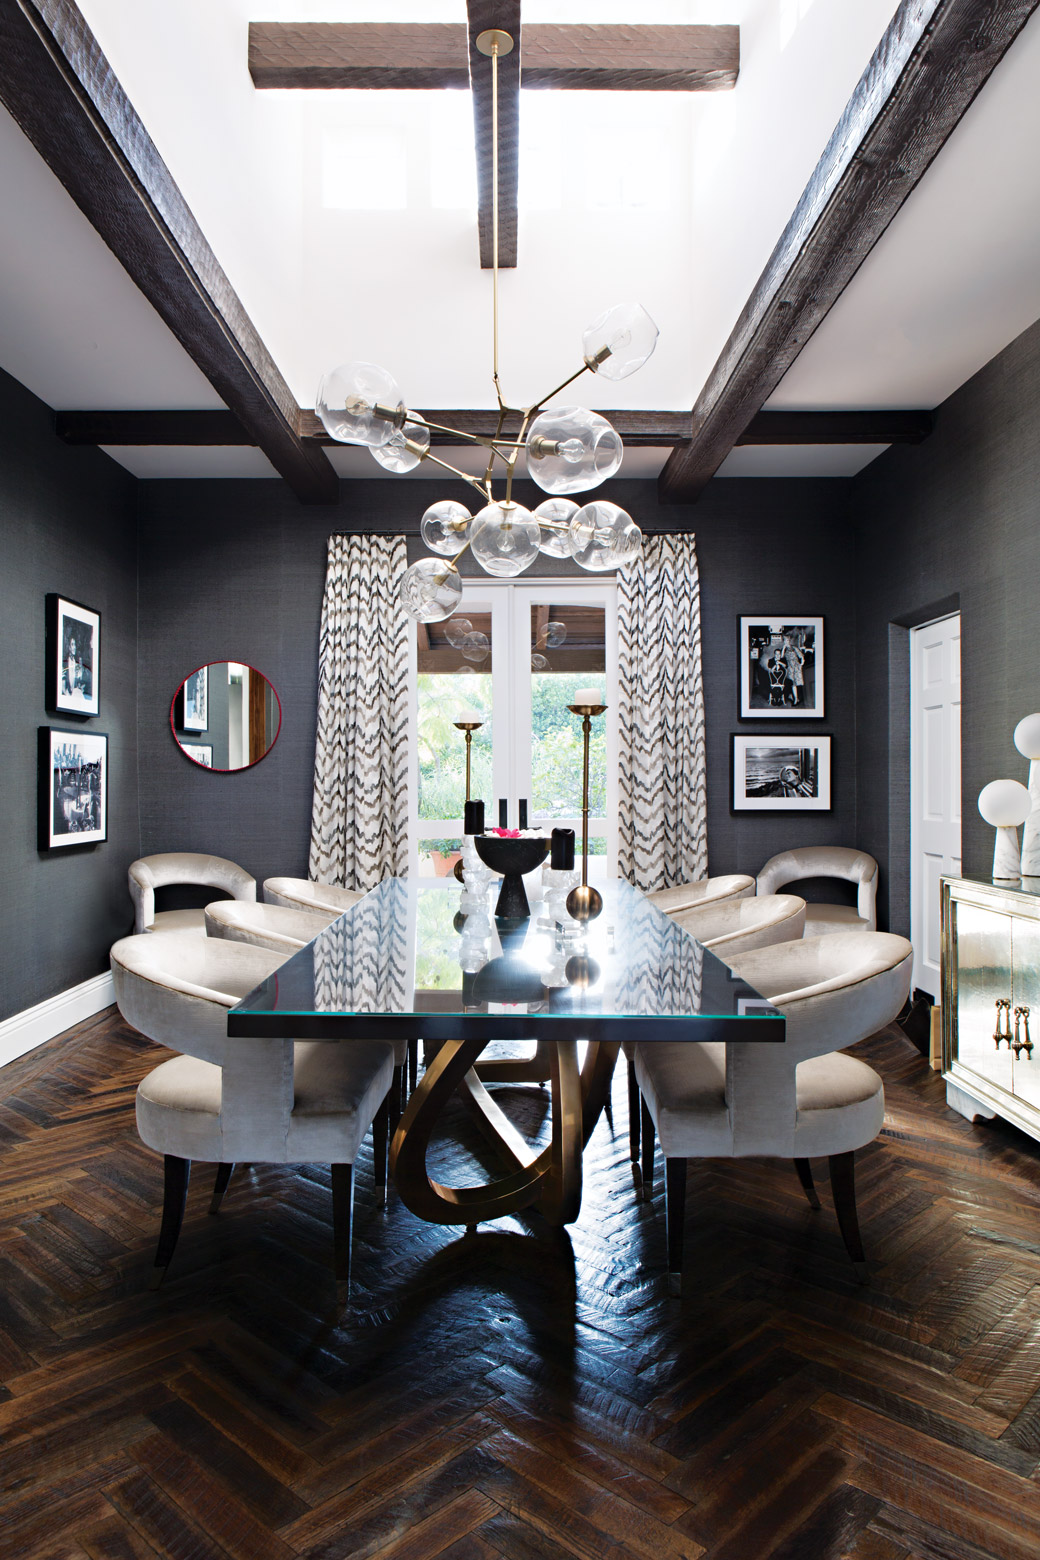 The sleek new dining room inside actress Linda Christian's former Bel-Air home.